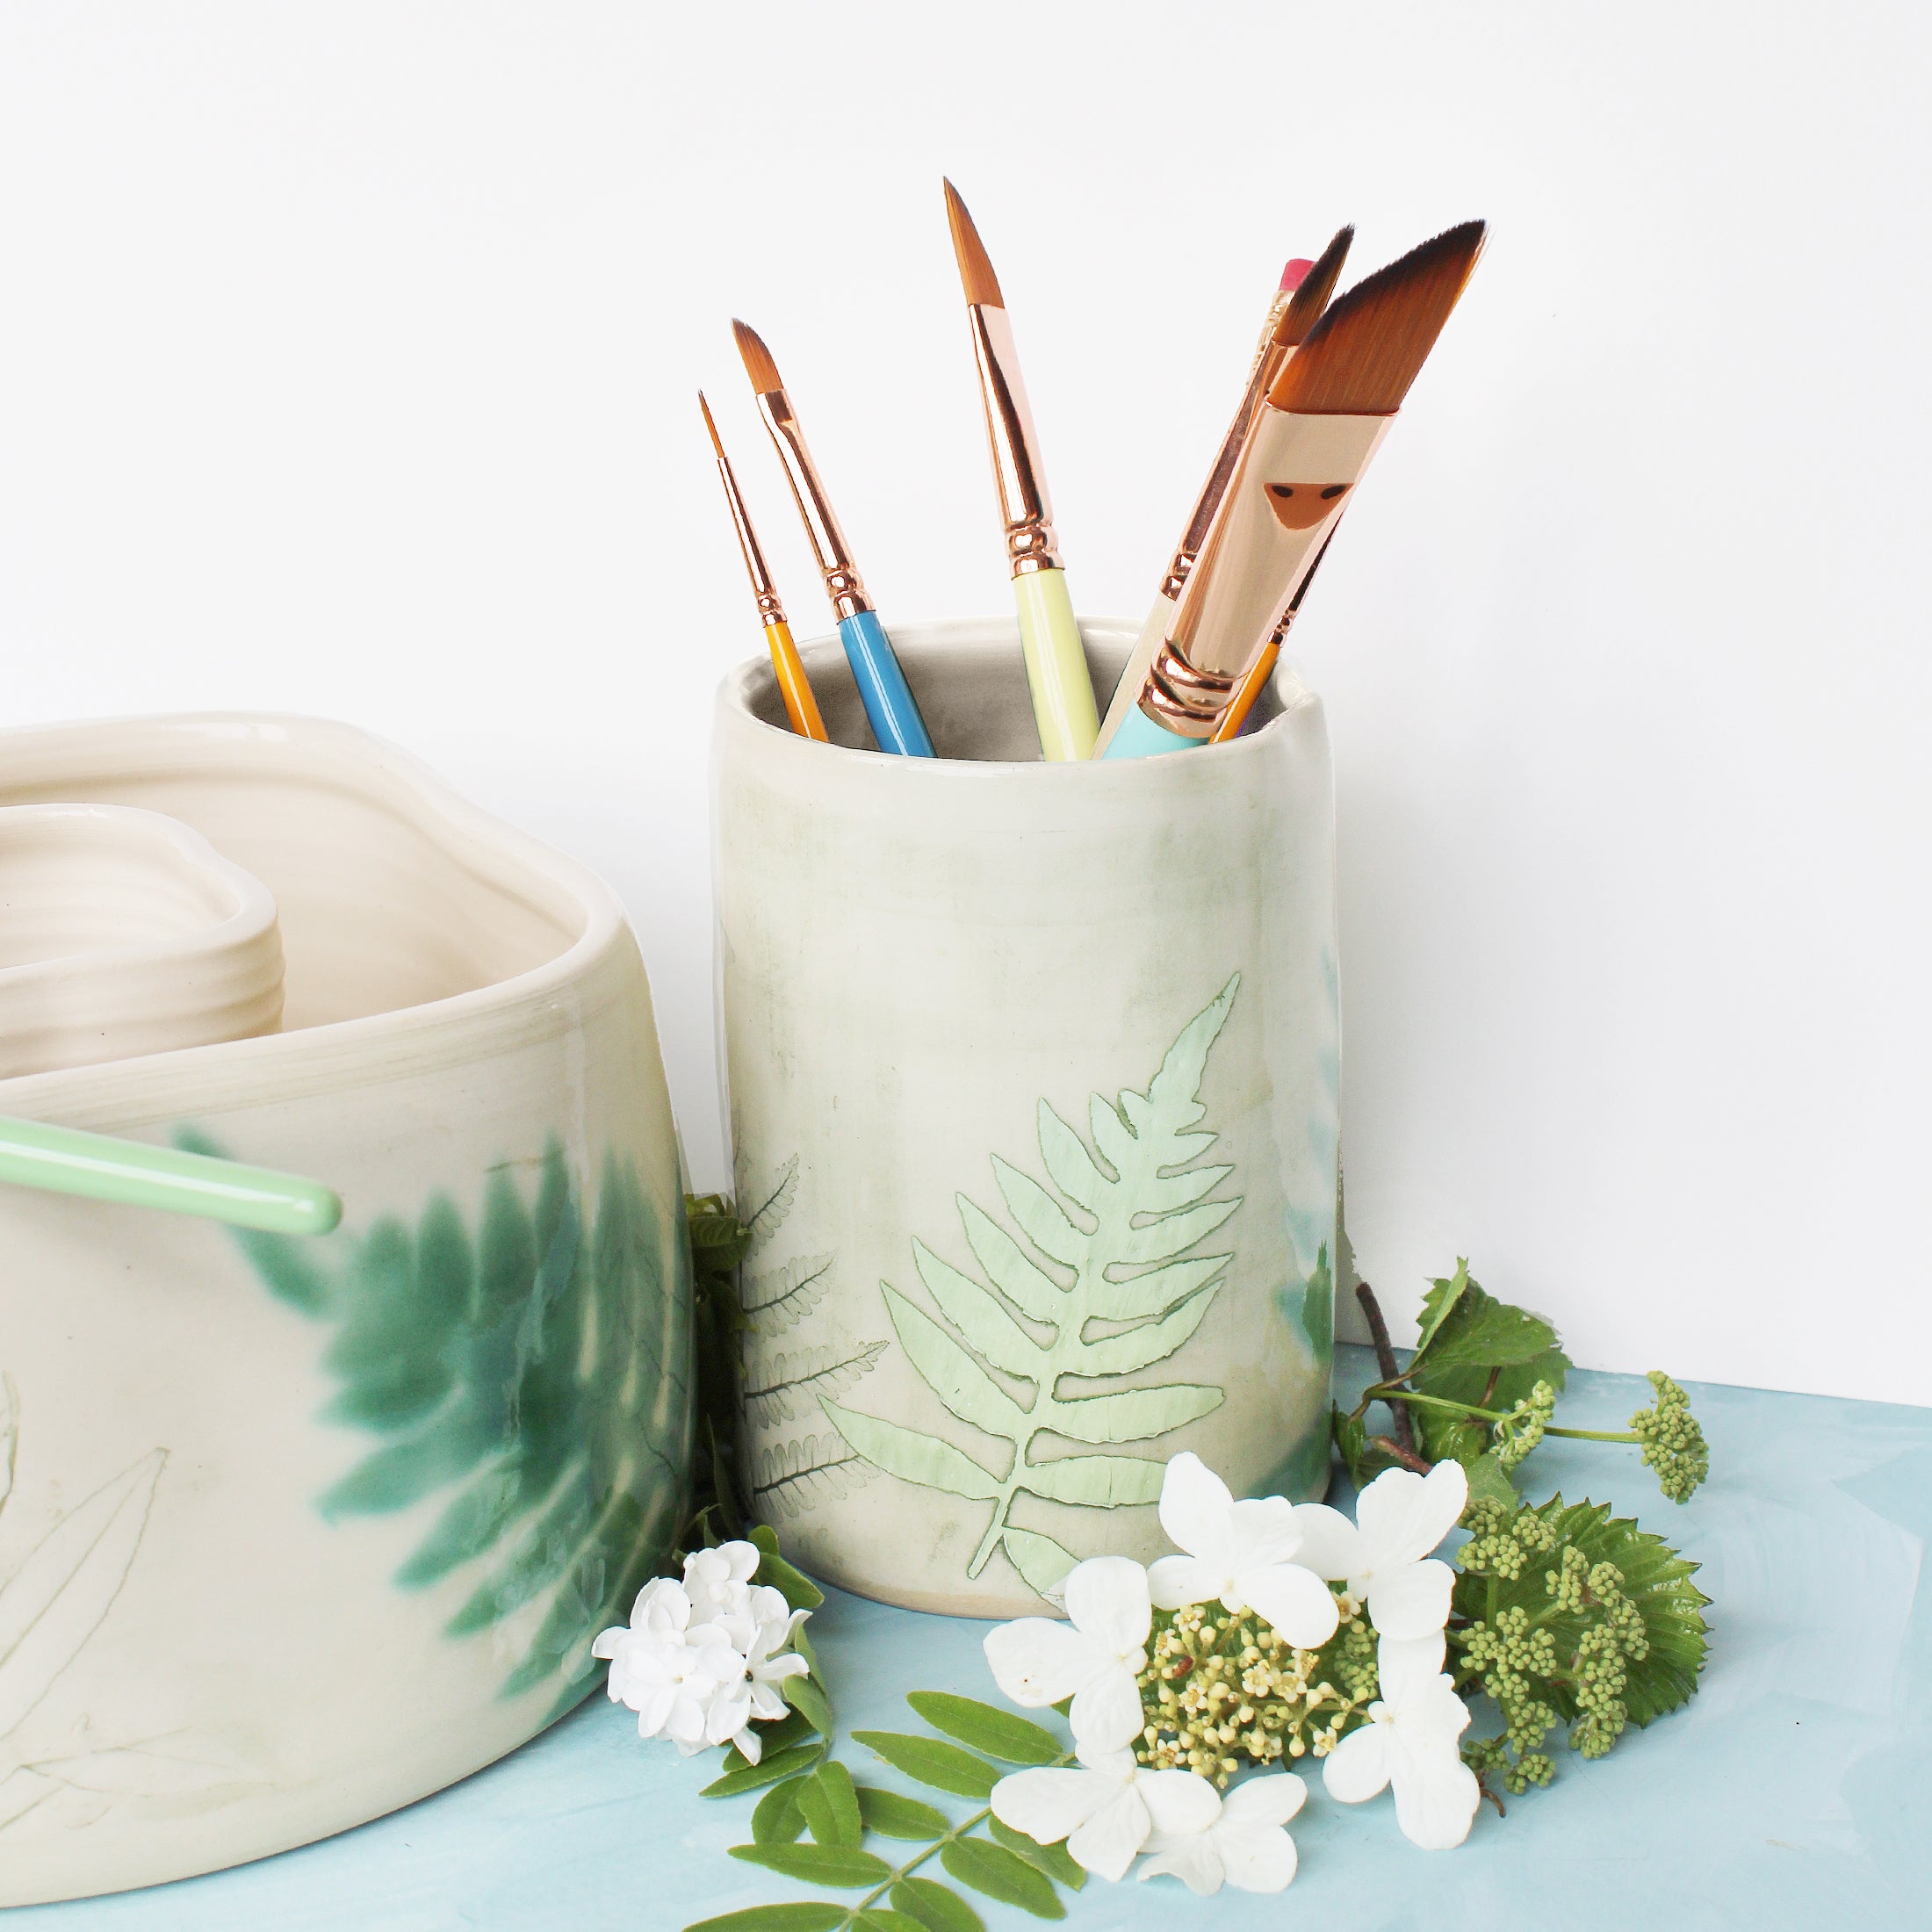 Special Edition Ceramic Brush Holder - Ferns - Unique Shopping for